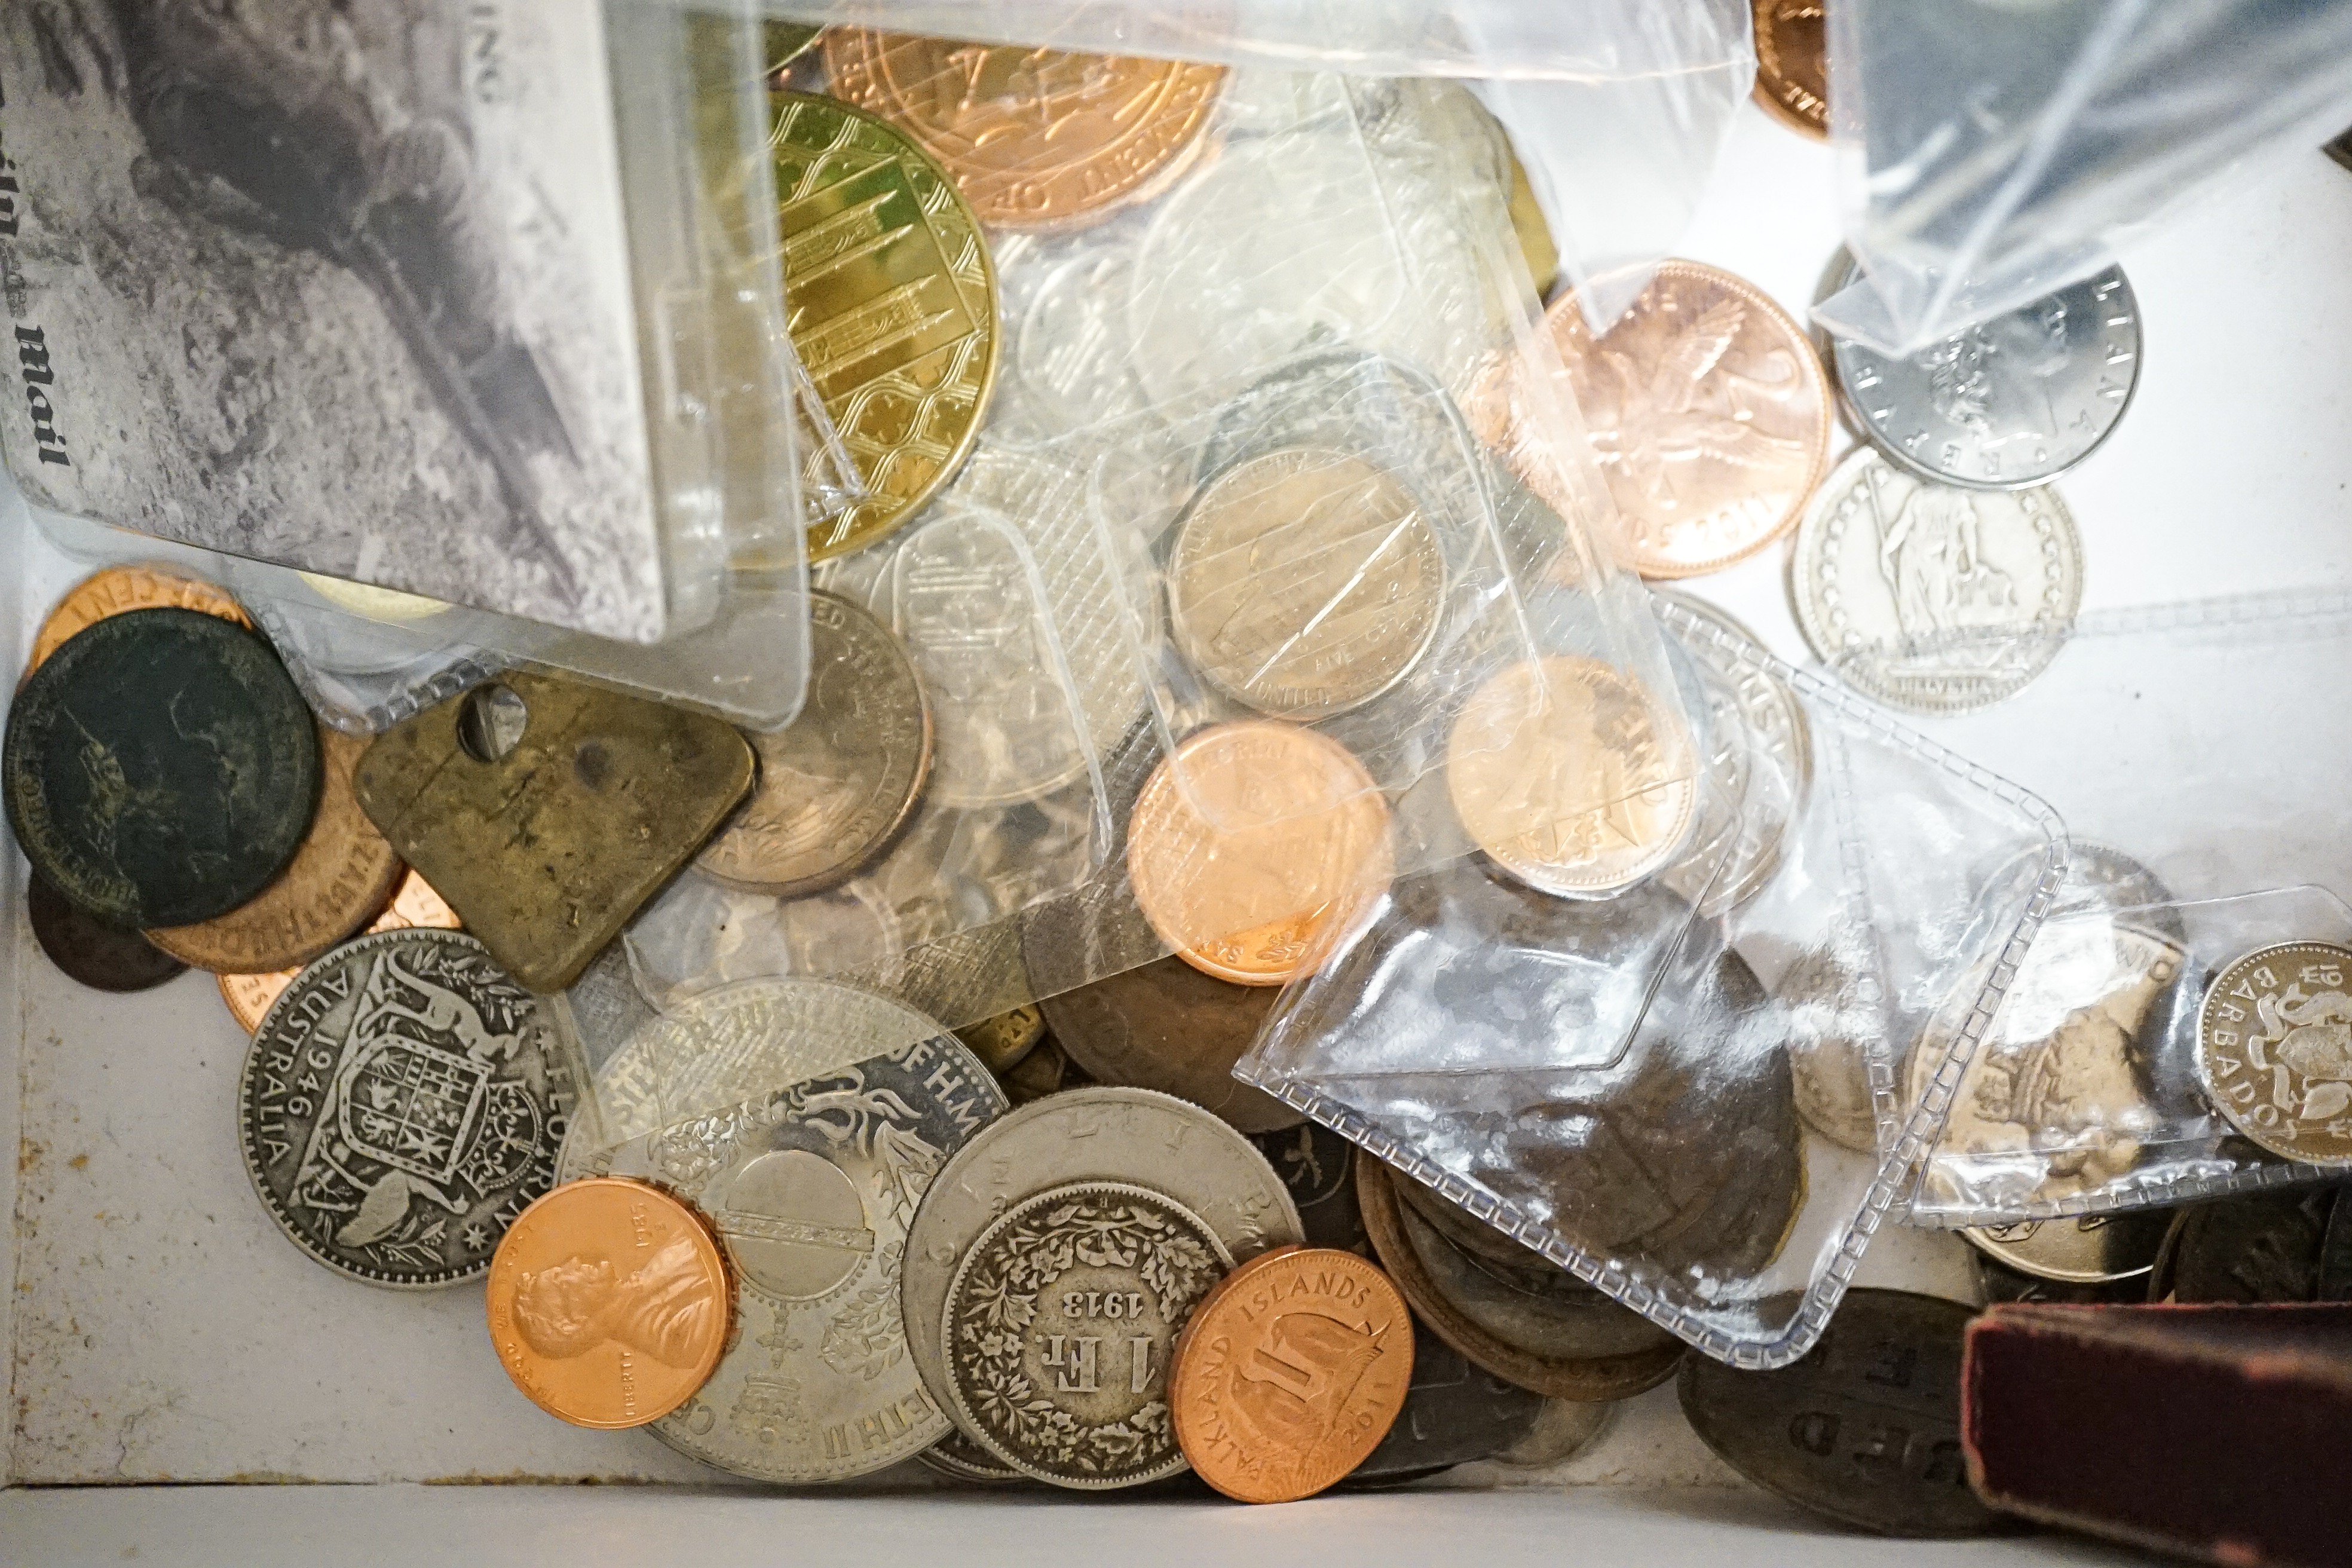 A collection of military badges and a collection of coins